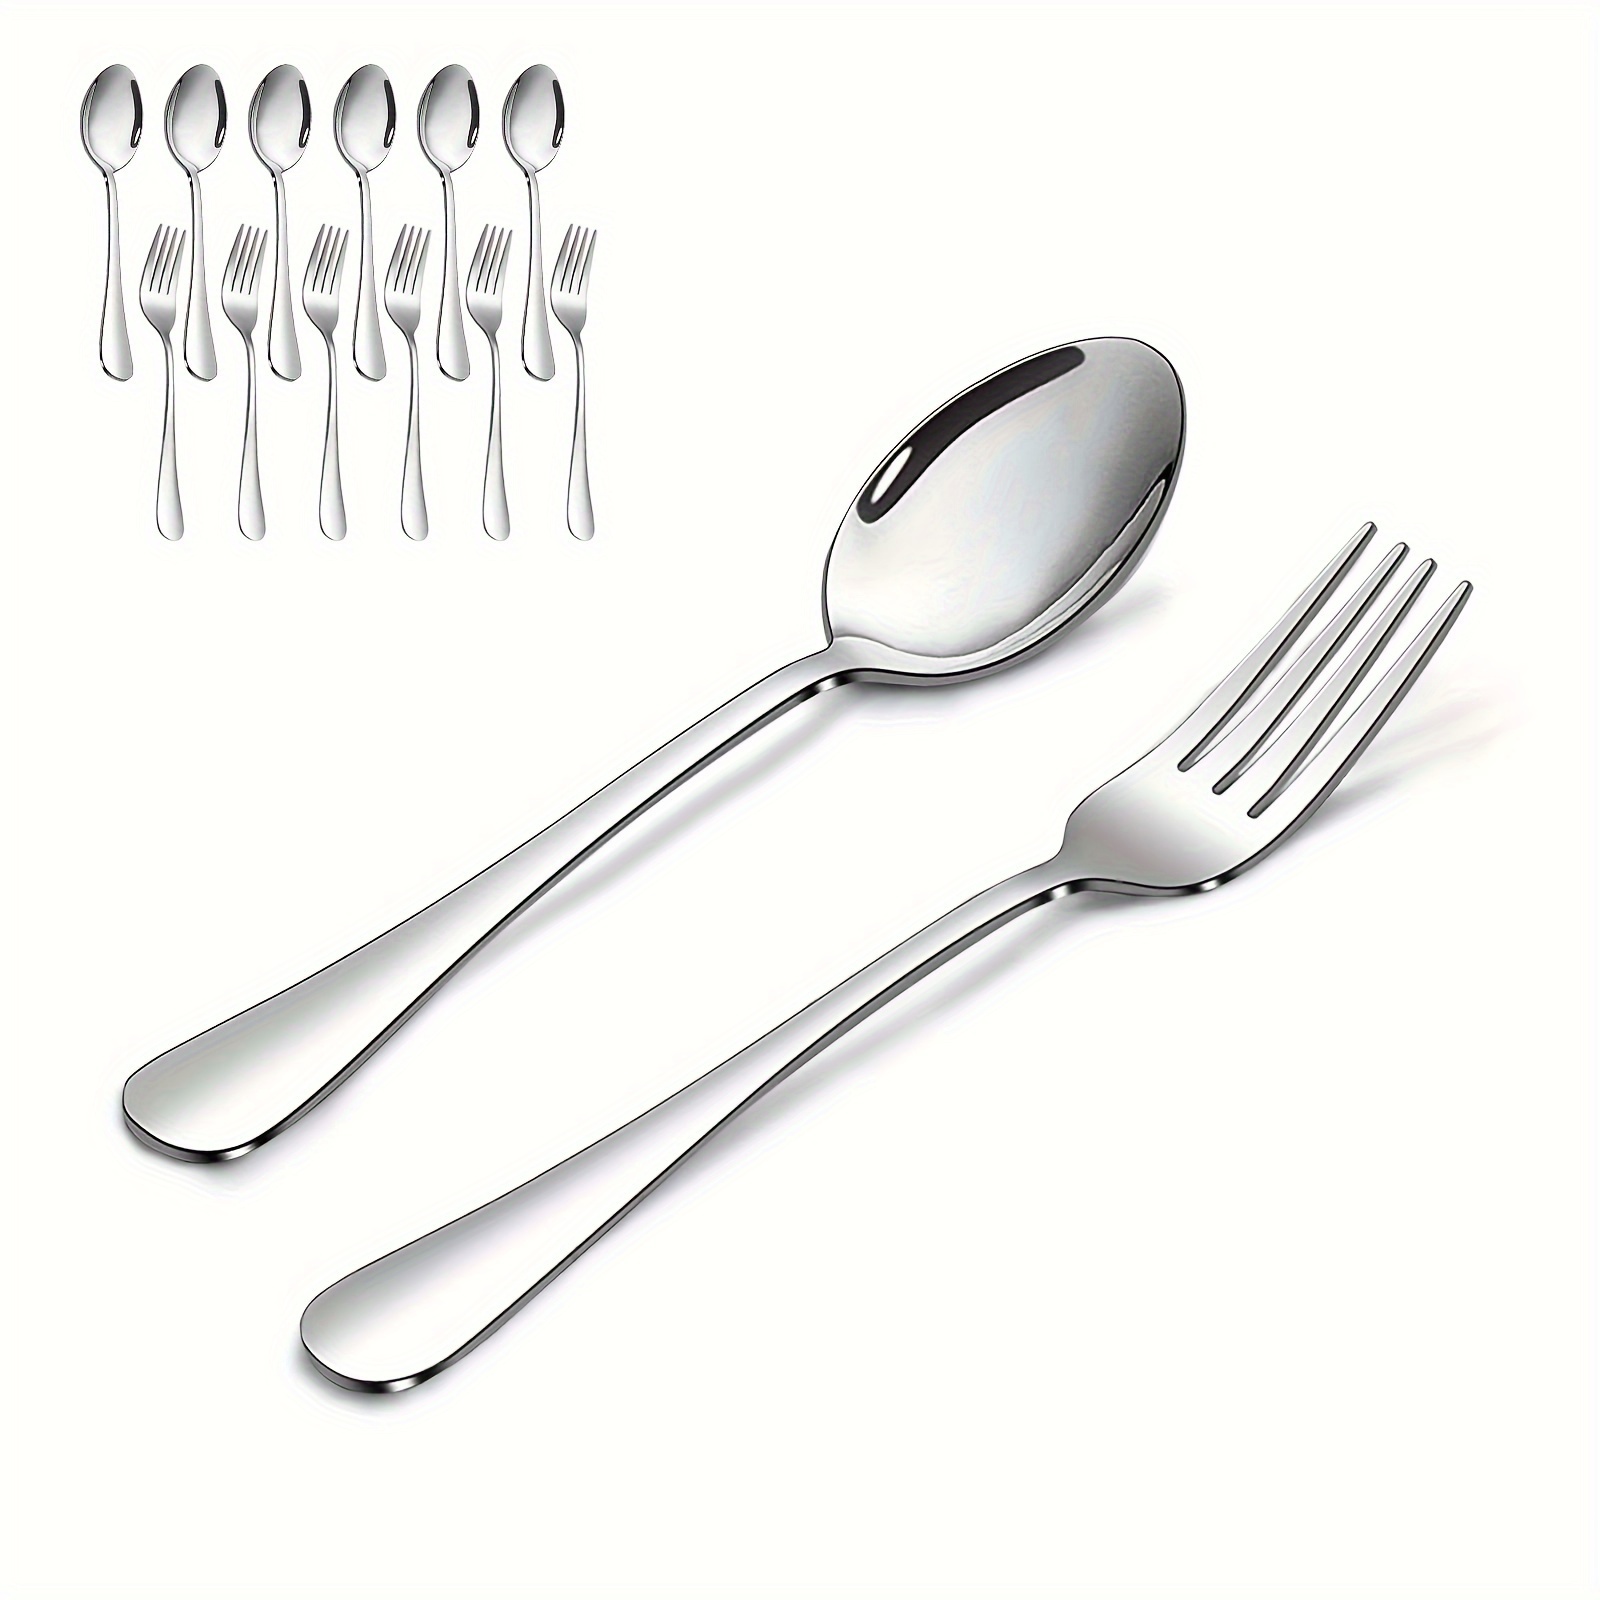 

12pcs Stainless Steel Spoon And Fork Set, Include 6pcs Dinner Fork And 6pcs Dinner Spoon Silverware Set, Dishwasher Safe, For Home Kitchen Restaurant Hotel, Kitchen Supplies, Tableware Accessories